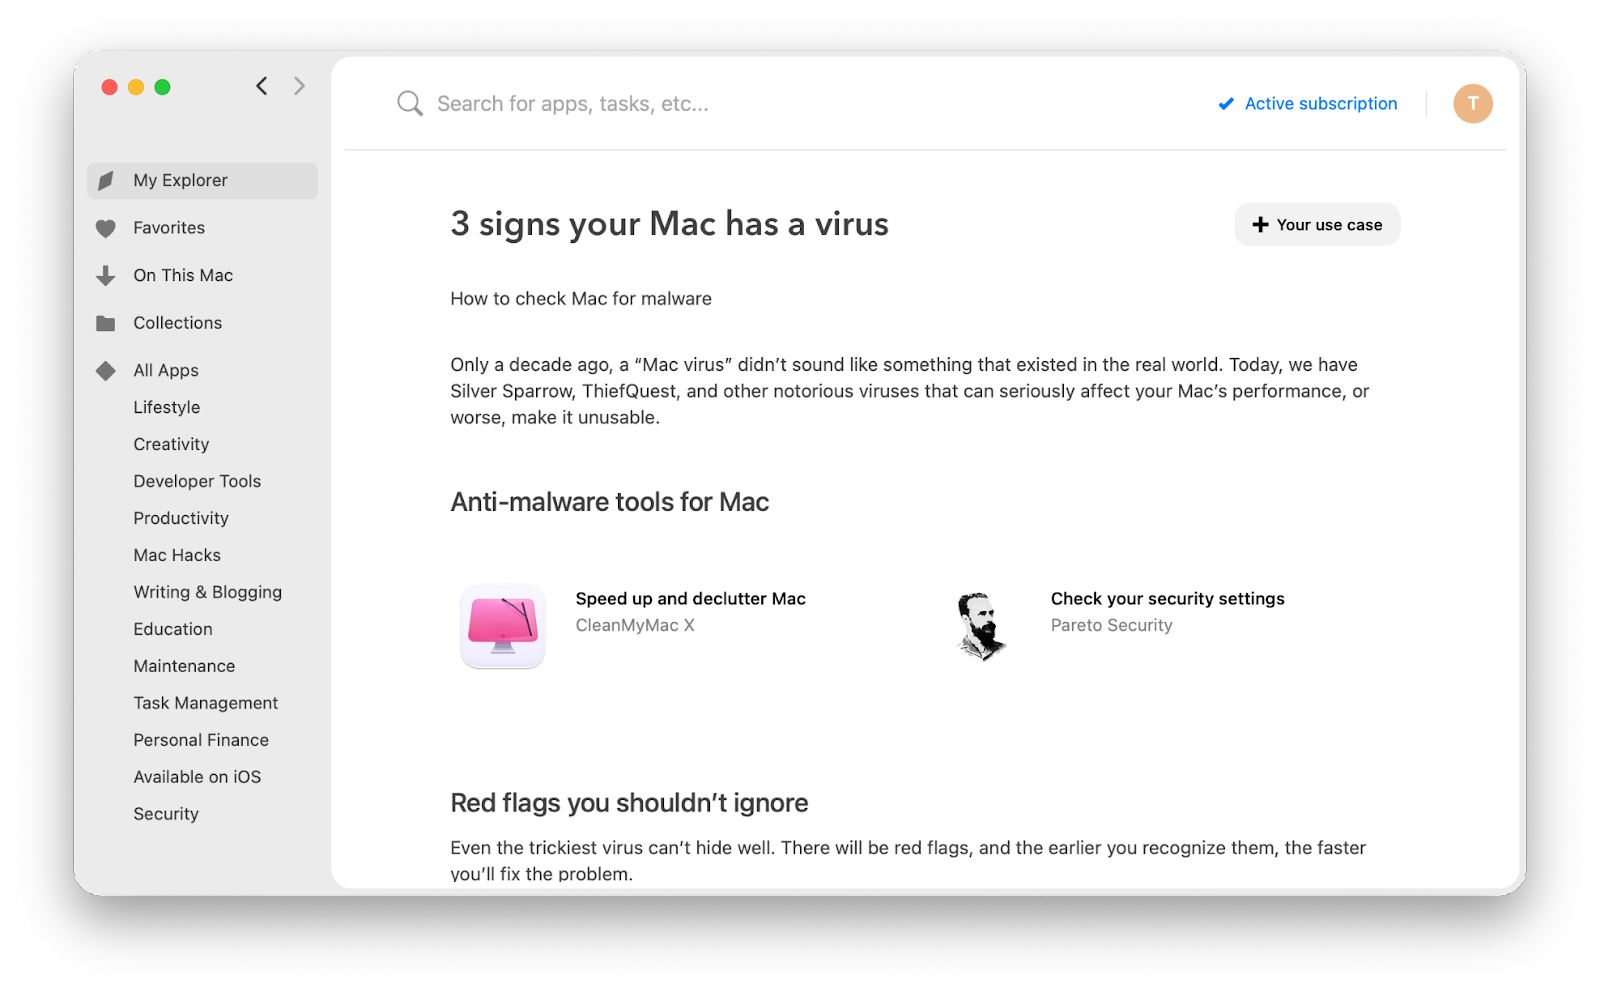 3 signs your Mac has a virus